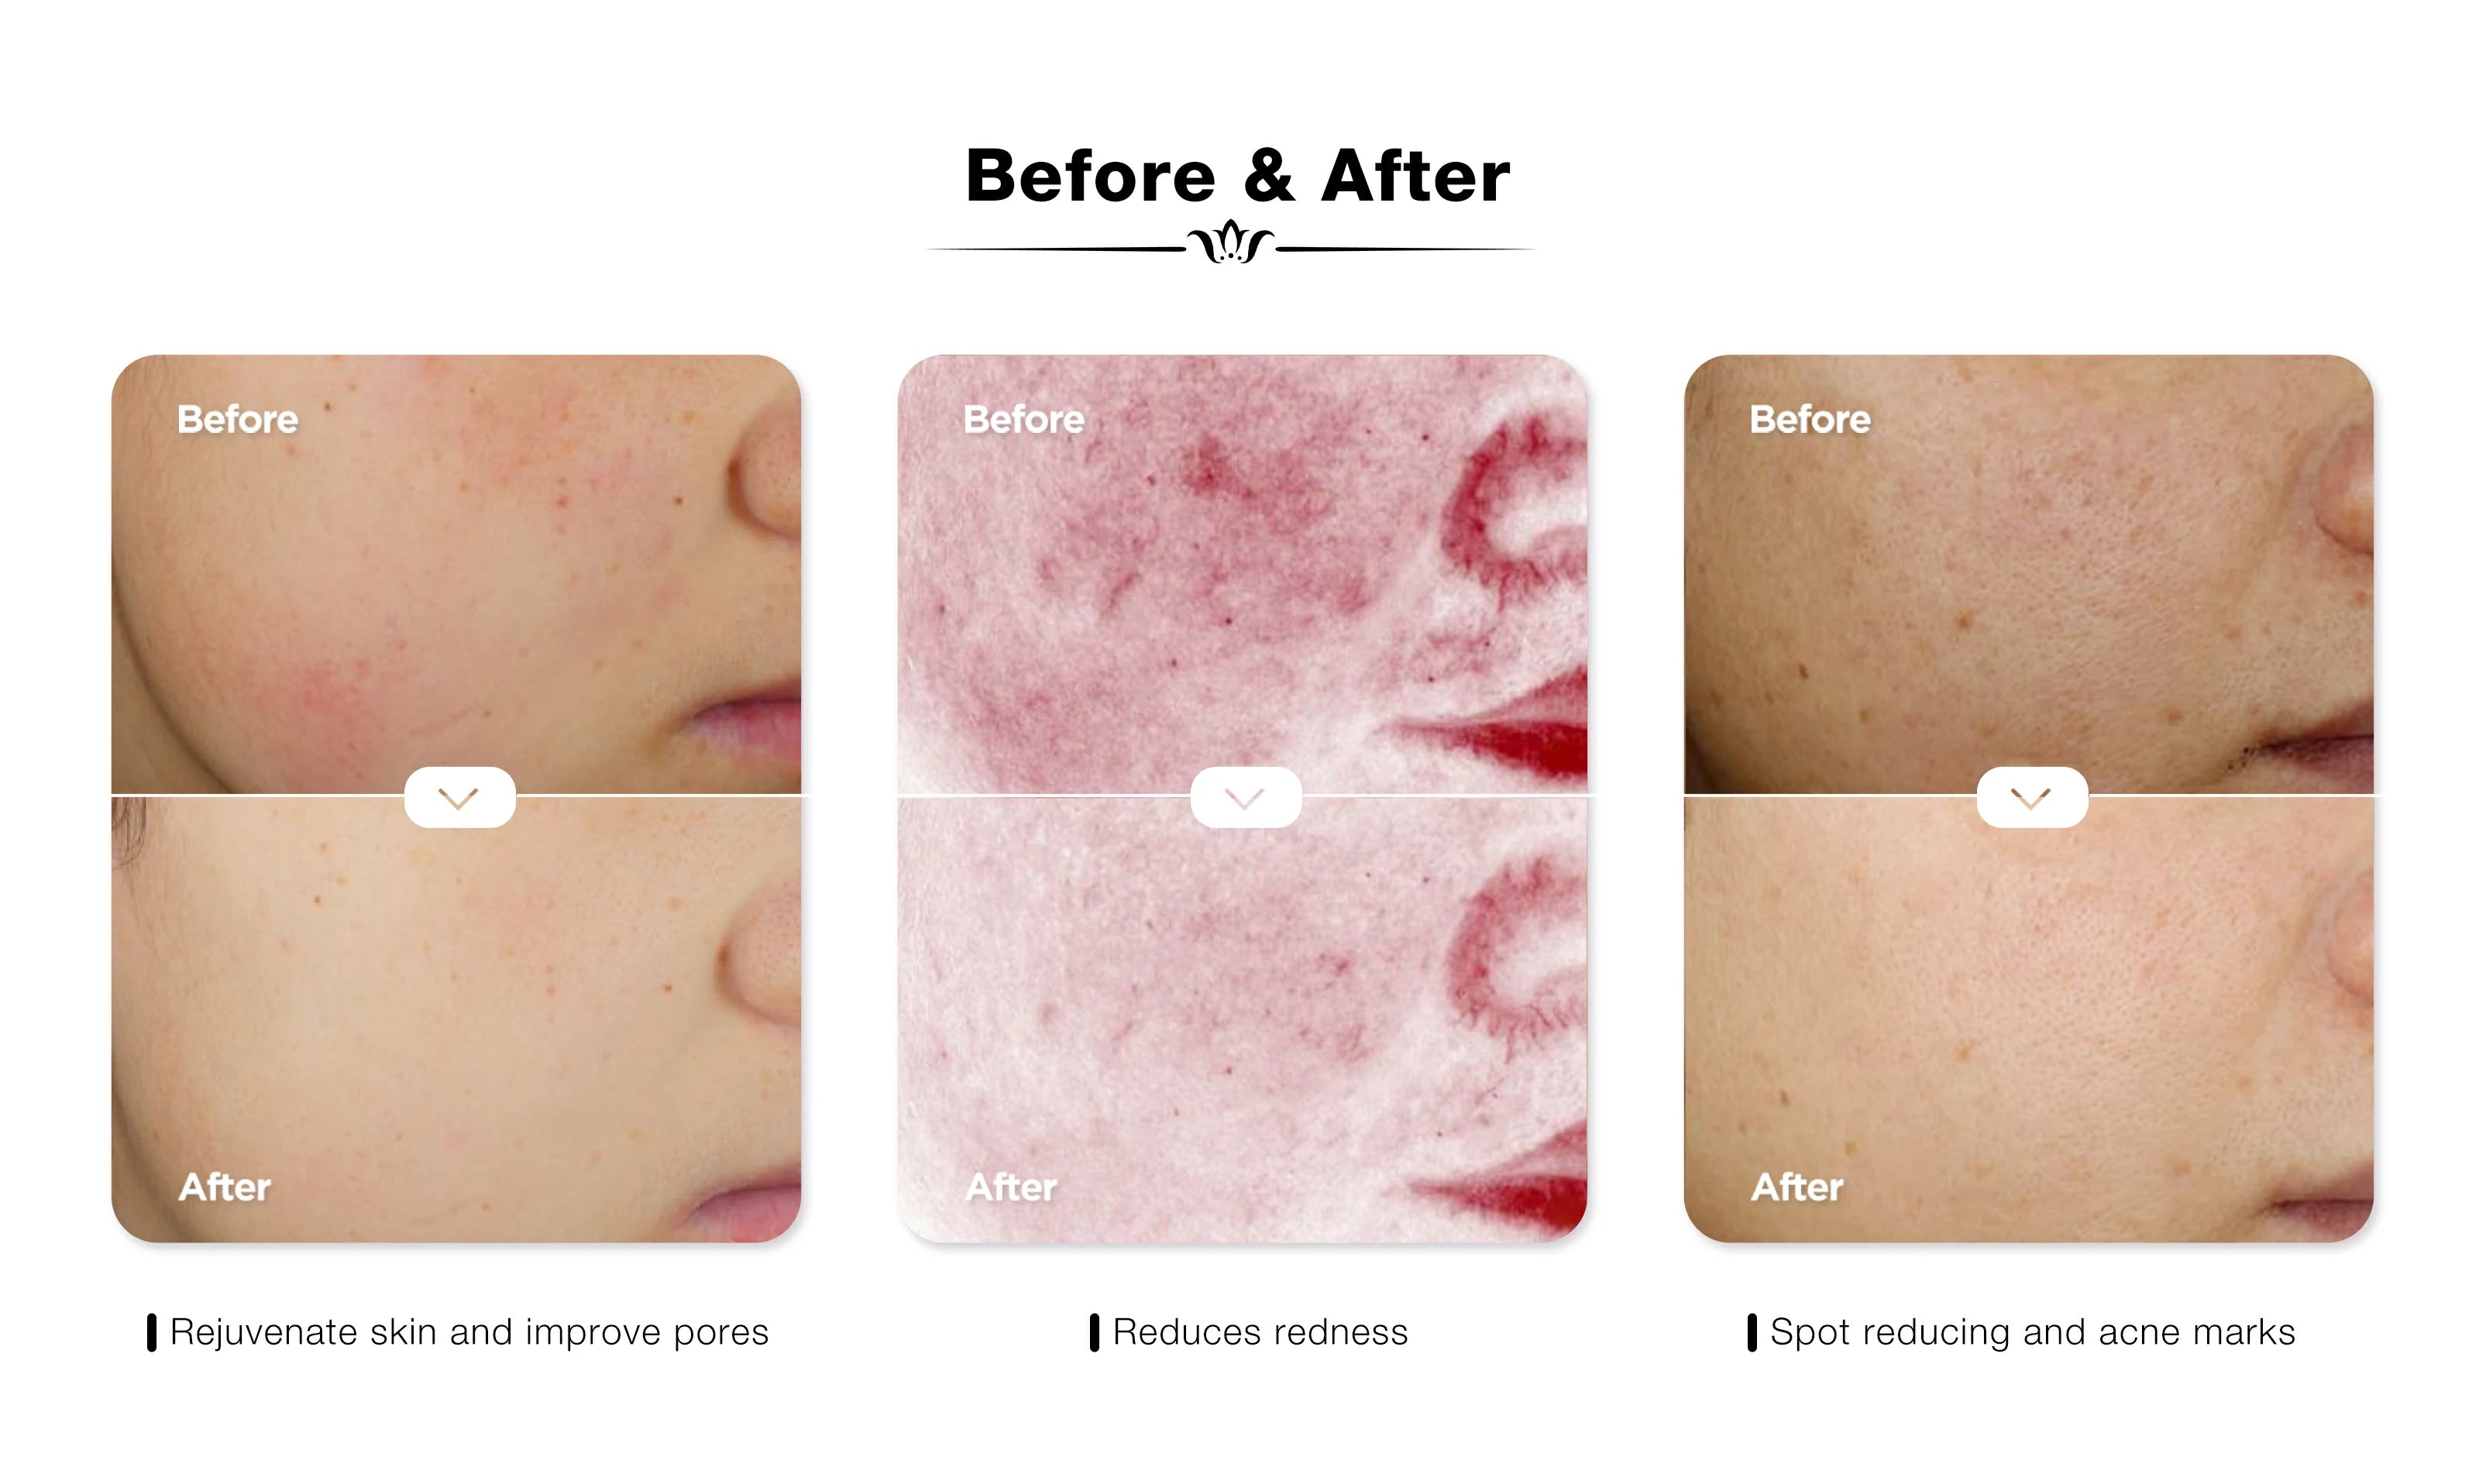 Before and after results using JOVS Blacken DPL Photorejuvenation Skincare Device showing rejuvenated skin, reduced redness, and diminished acne marks.